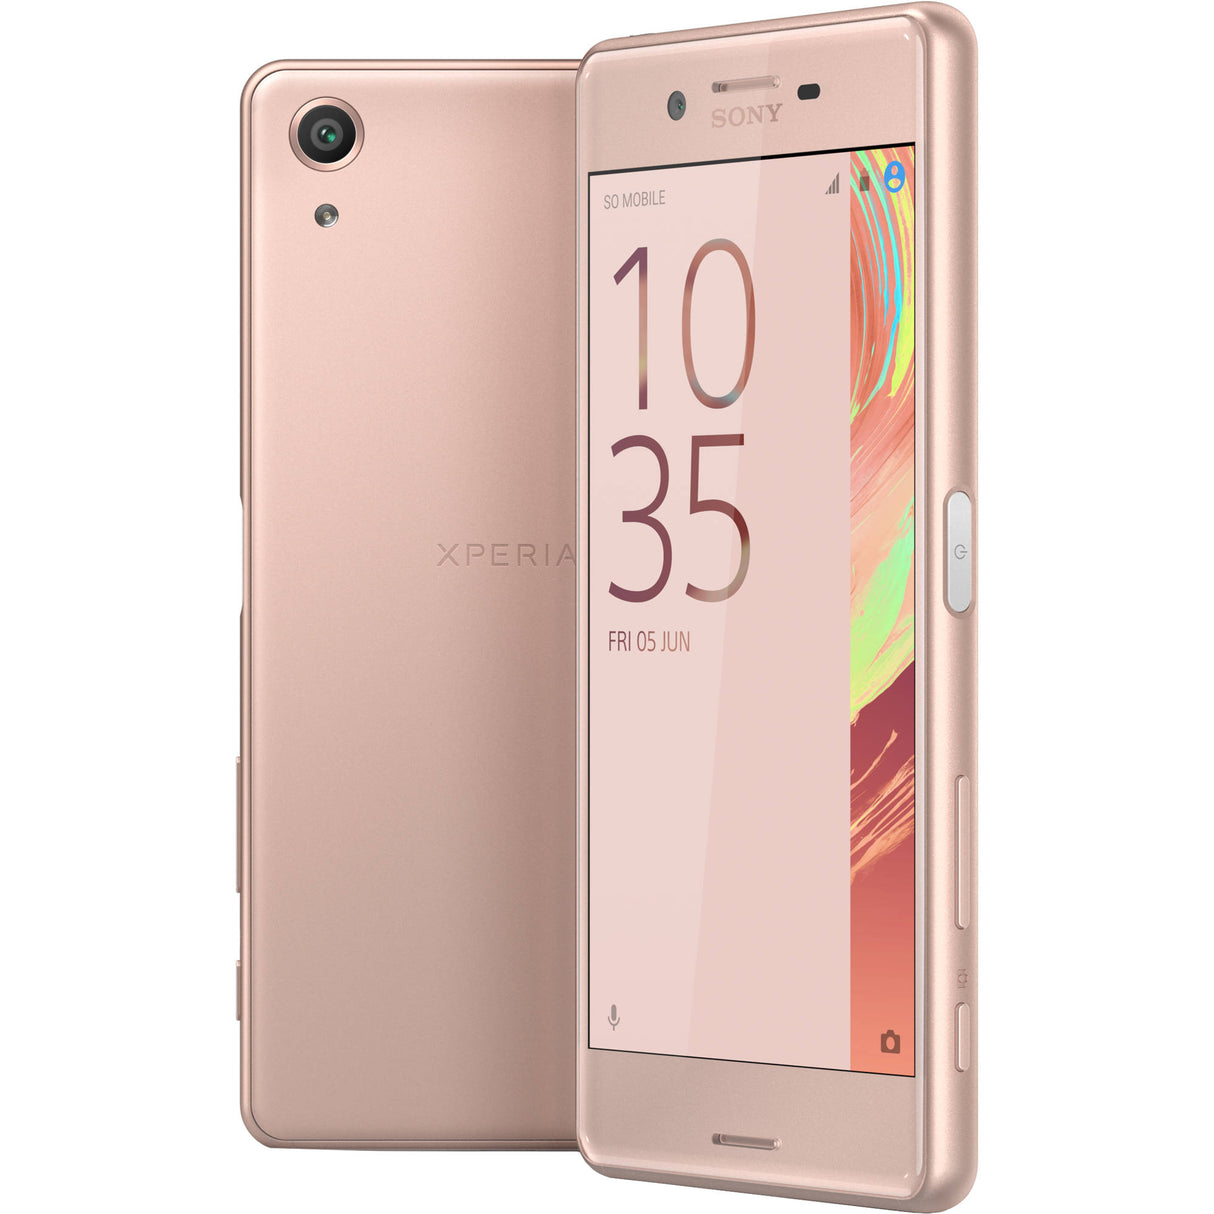 Sony Xperia X Performance - 32 GB - Rose Gold - Unlocked - GSM